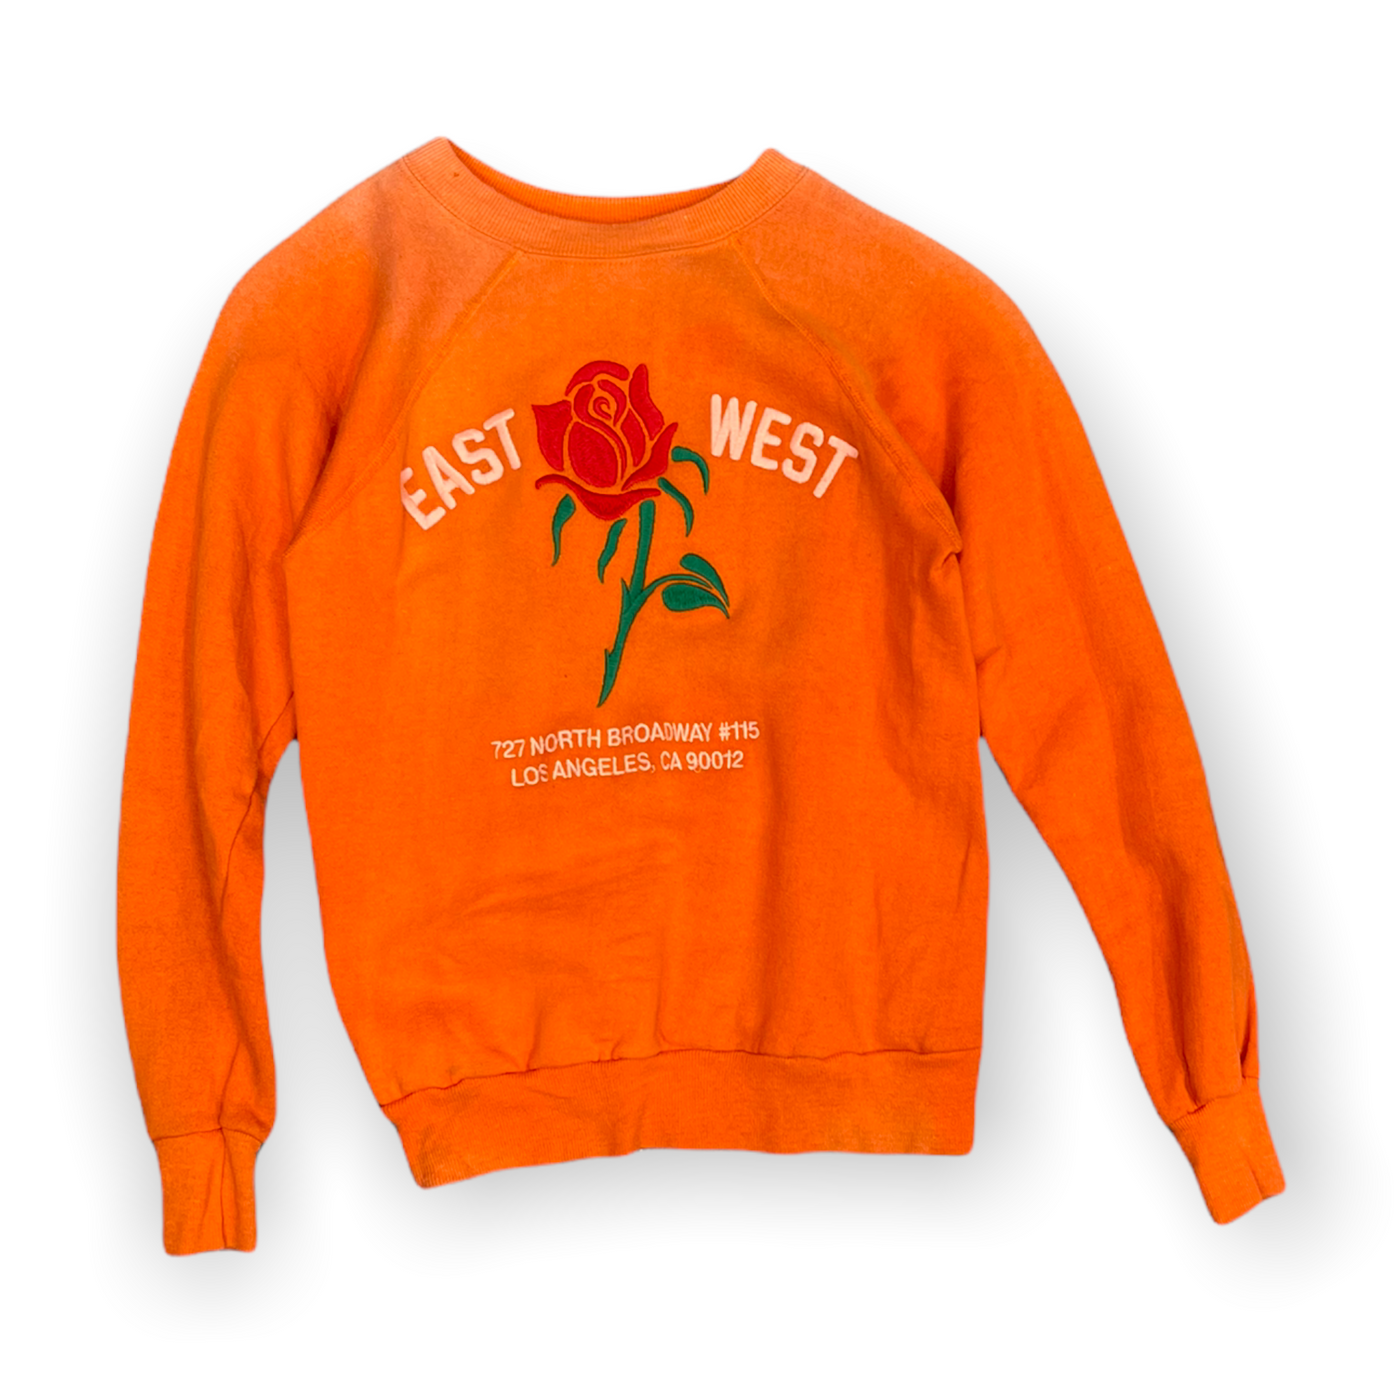 Front of orange sweatshirt featuring rose embroidery